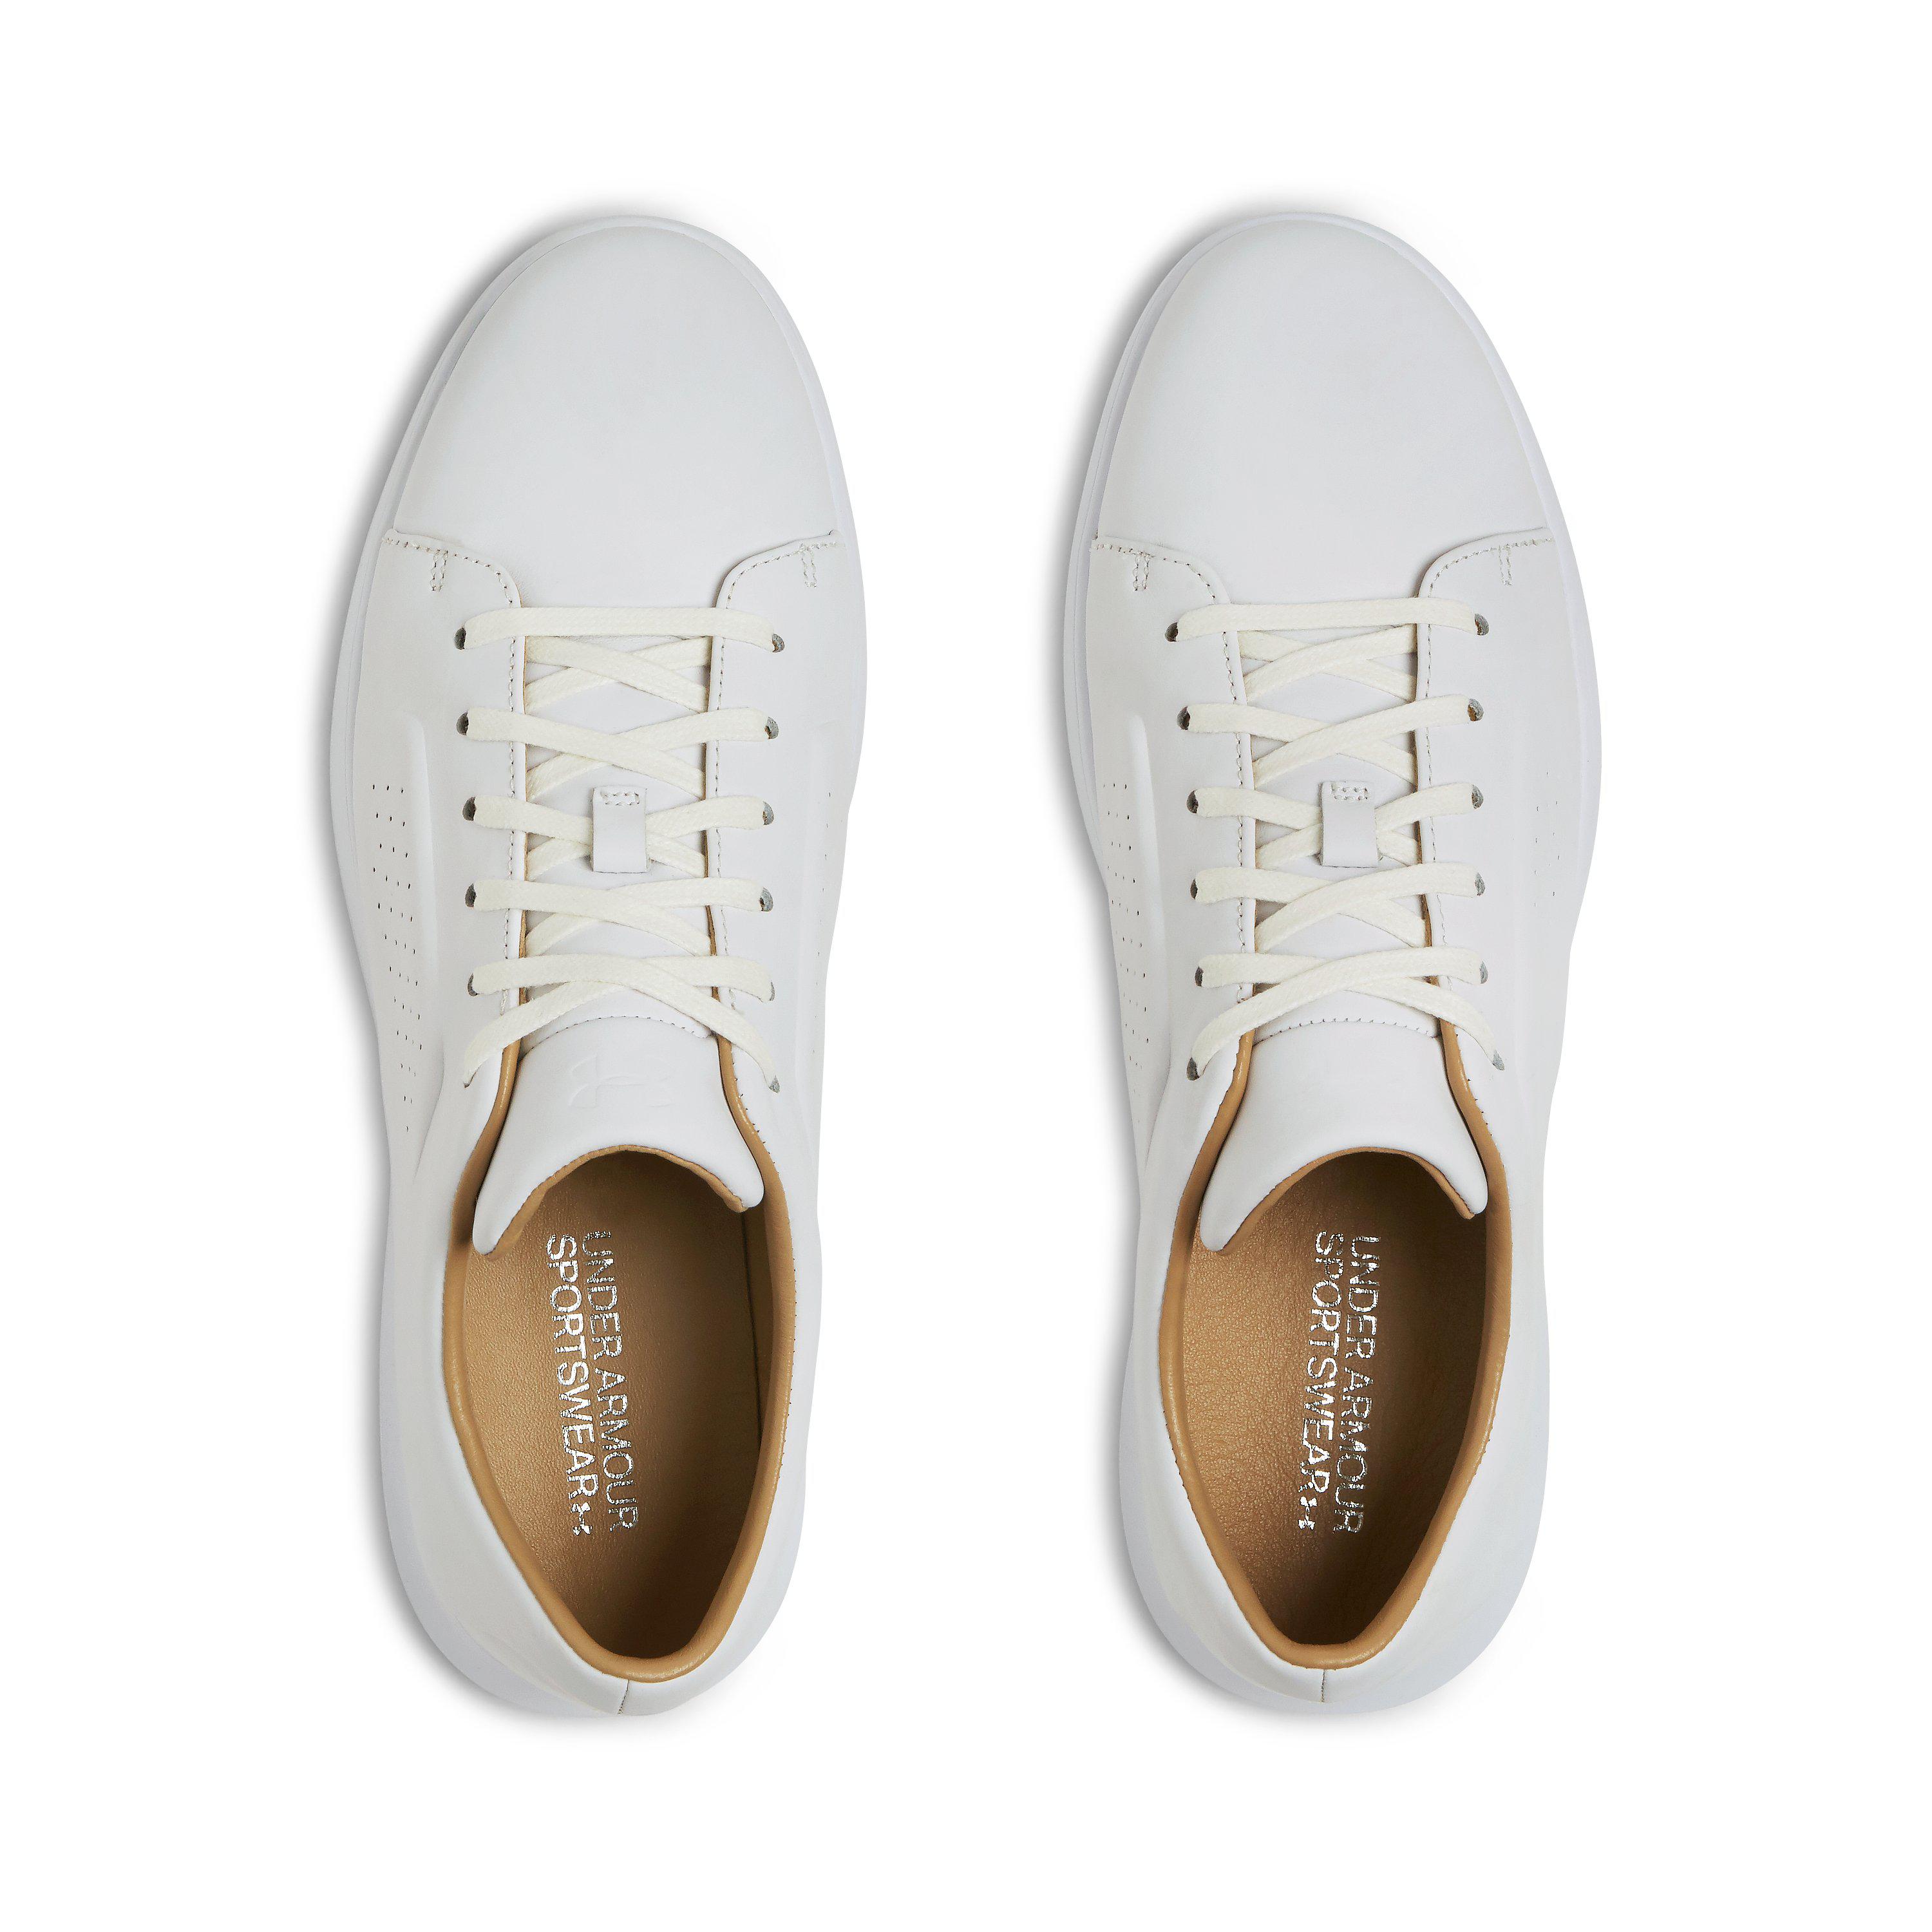 Under Armour Men's Uas Club Low - Leather Shoes in White for Men - Lyst